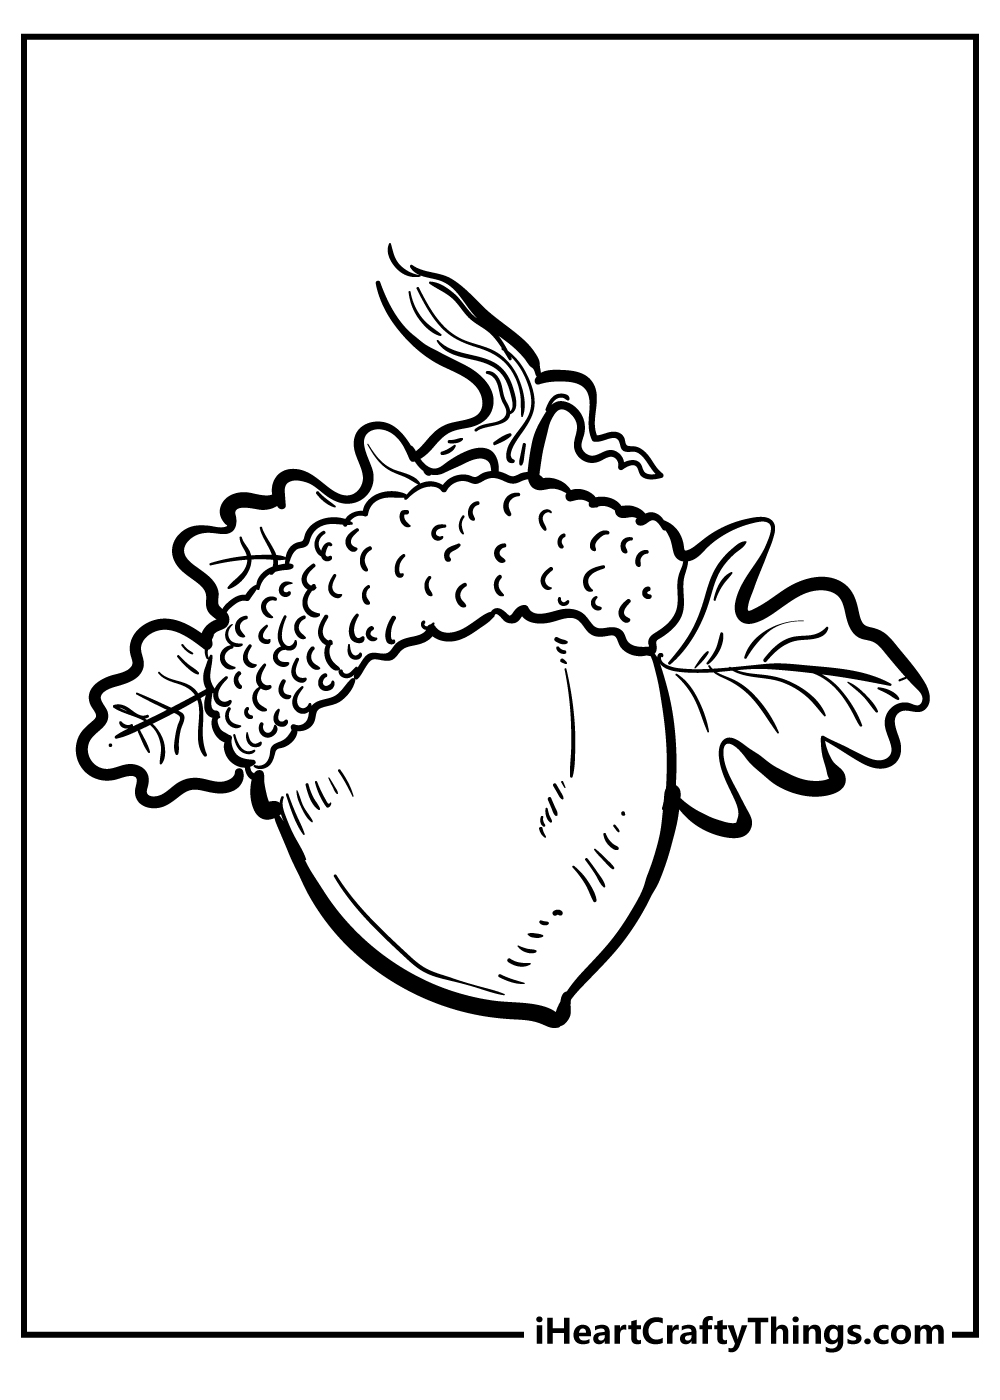 Acorn Coloring Pages free pdf download